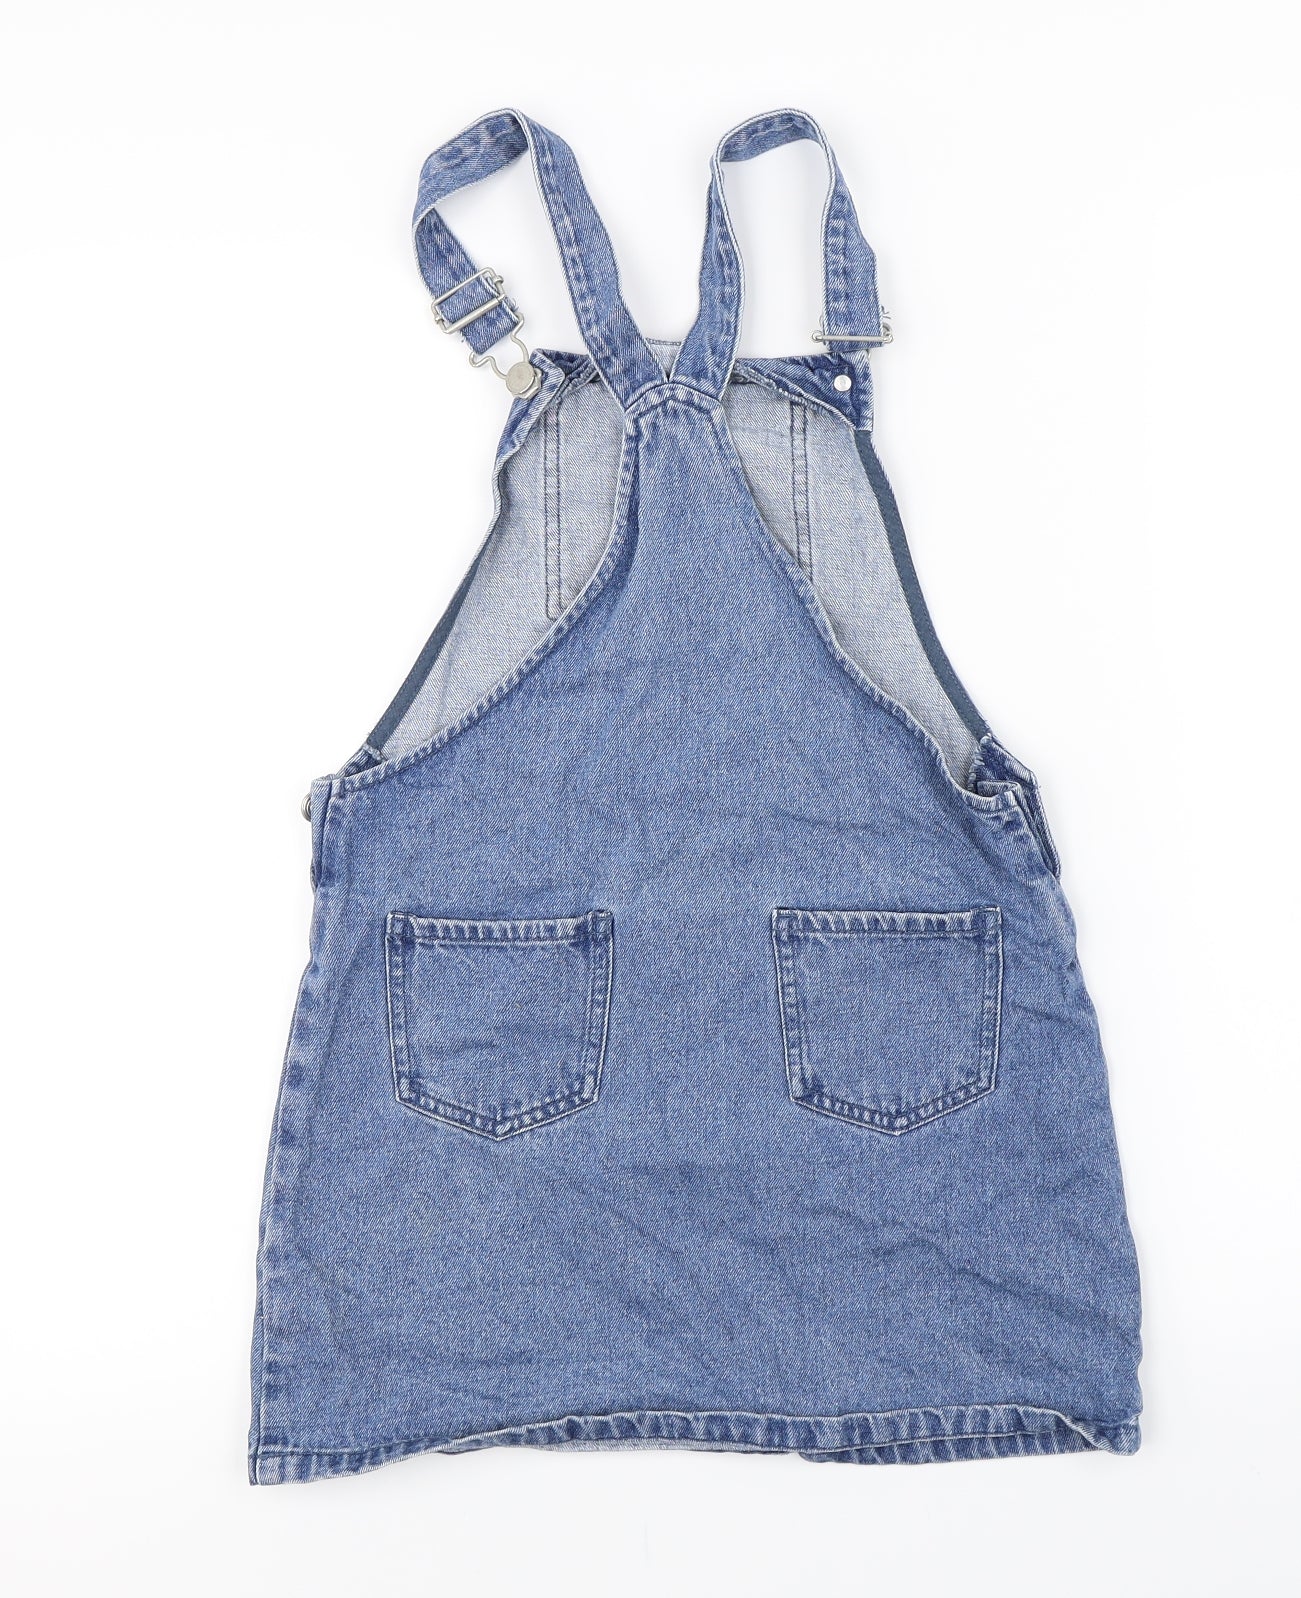 NEXT Girls Blue   Dungaree One-Piece Size 10 Years